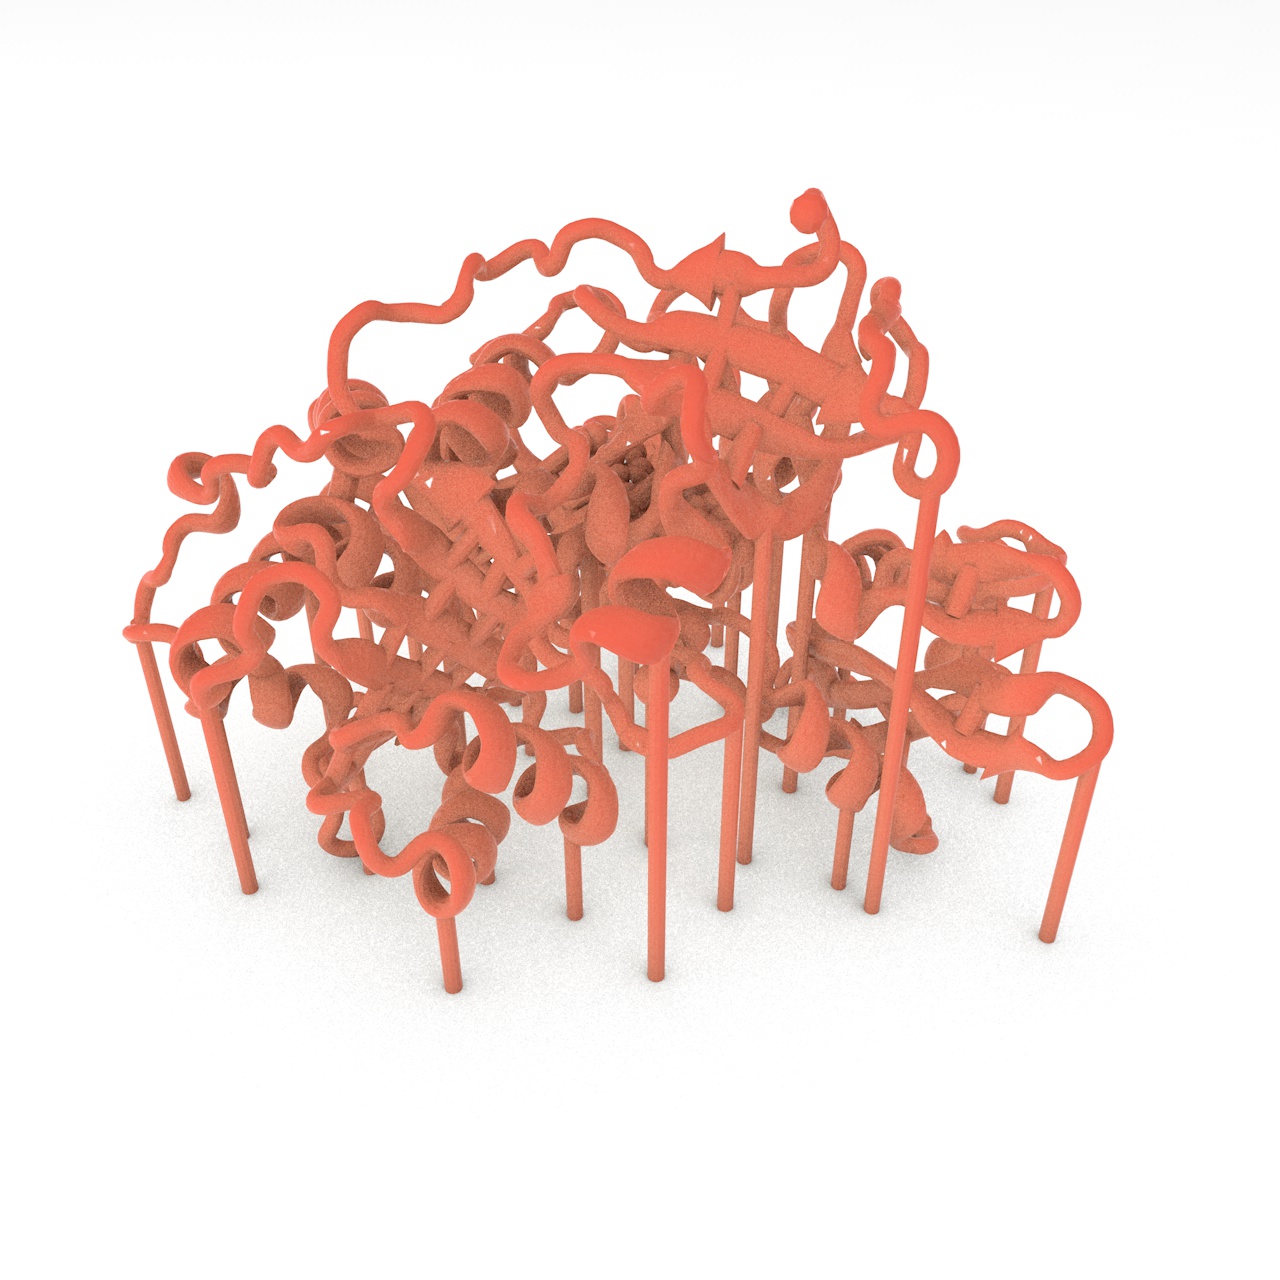 Firefly luciferase PDB 2D1S Protein crystal structure 3d print model